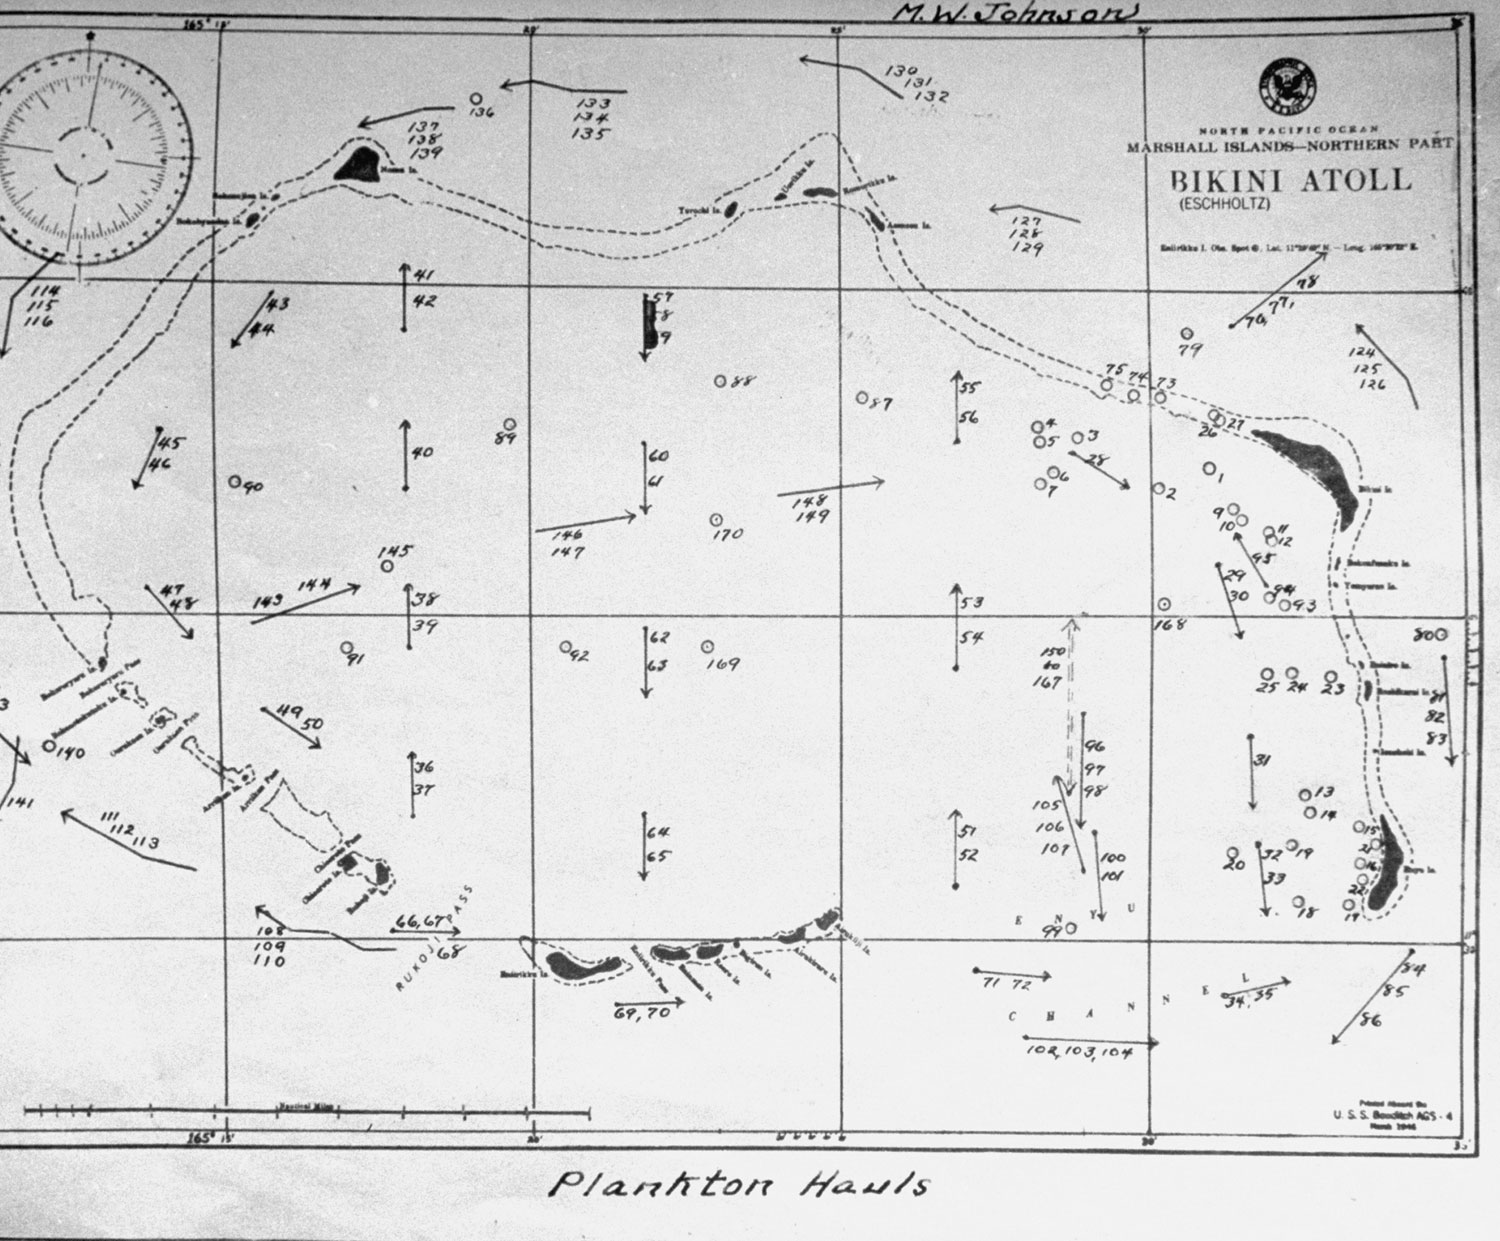 A map showing the areas in which plankton was collected for radiation testing, Bikini Atoll, 1946.